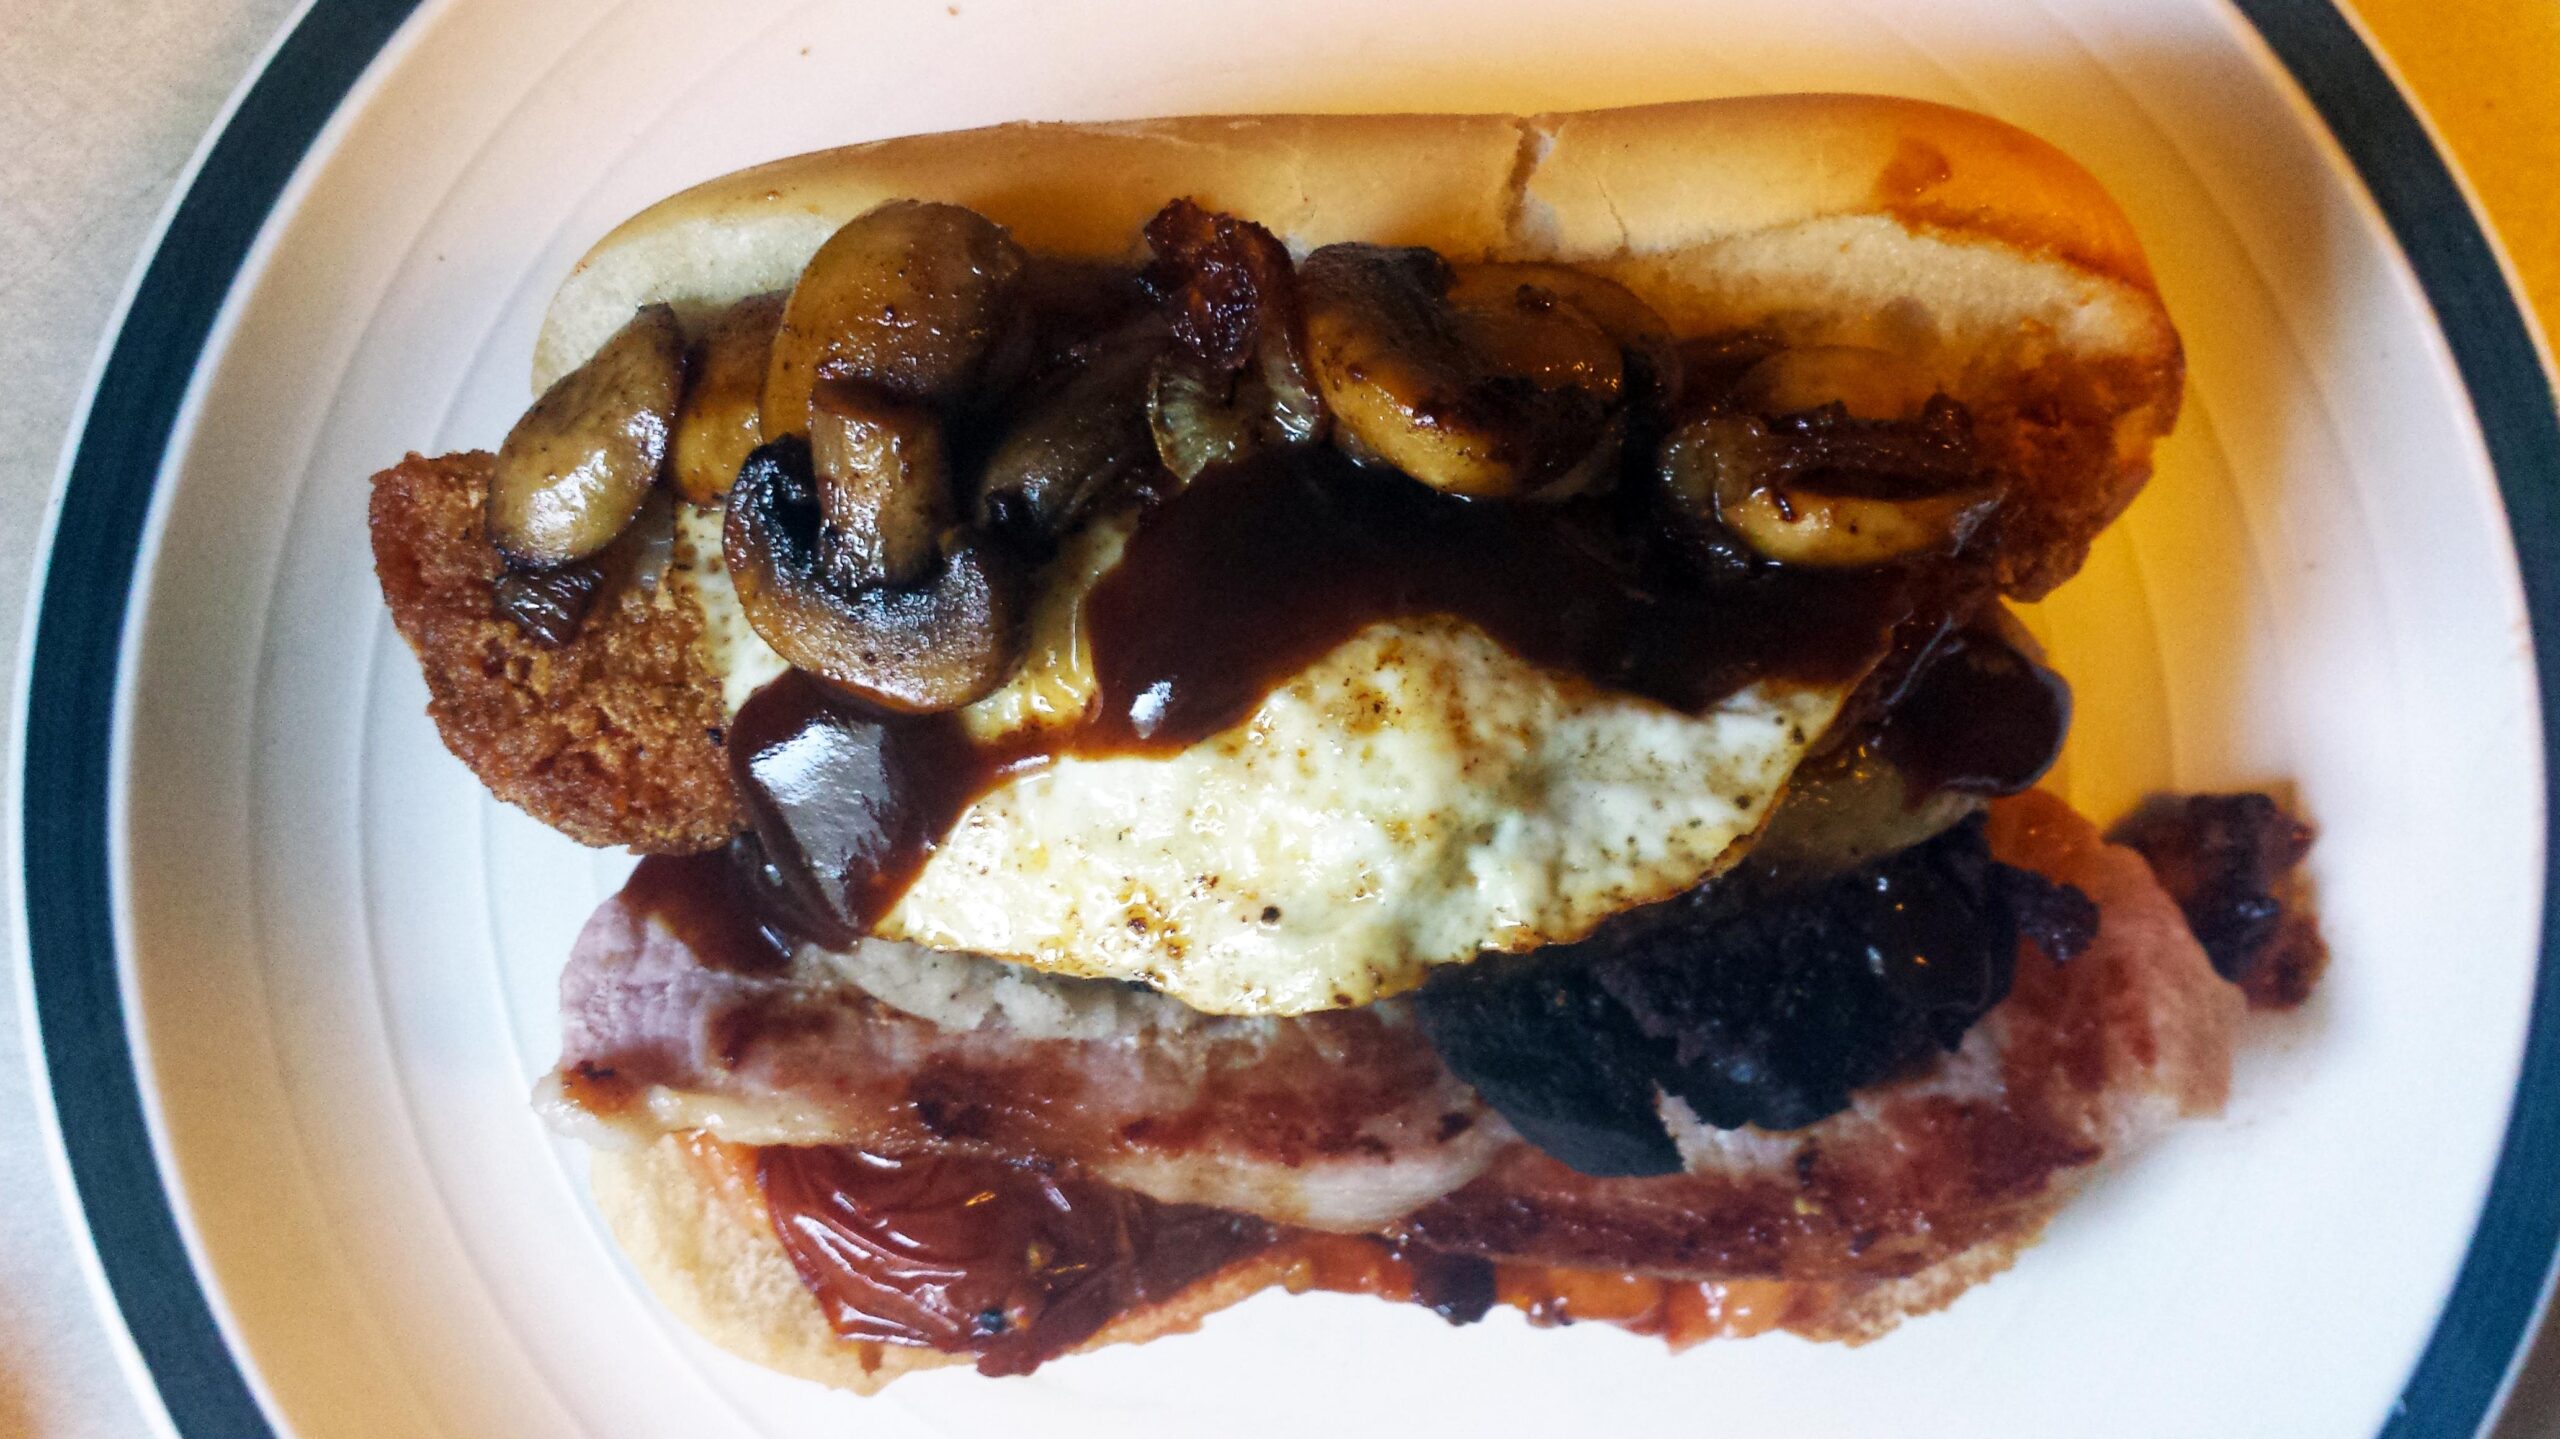  Breakfast just got a whole lot better with these easy-to-make Irish Breakfast Rolls.